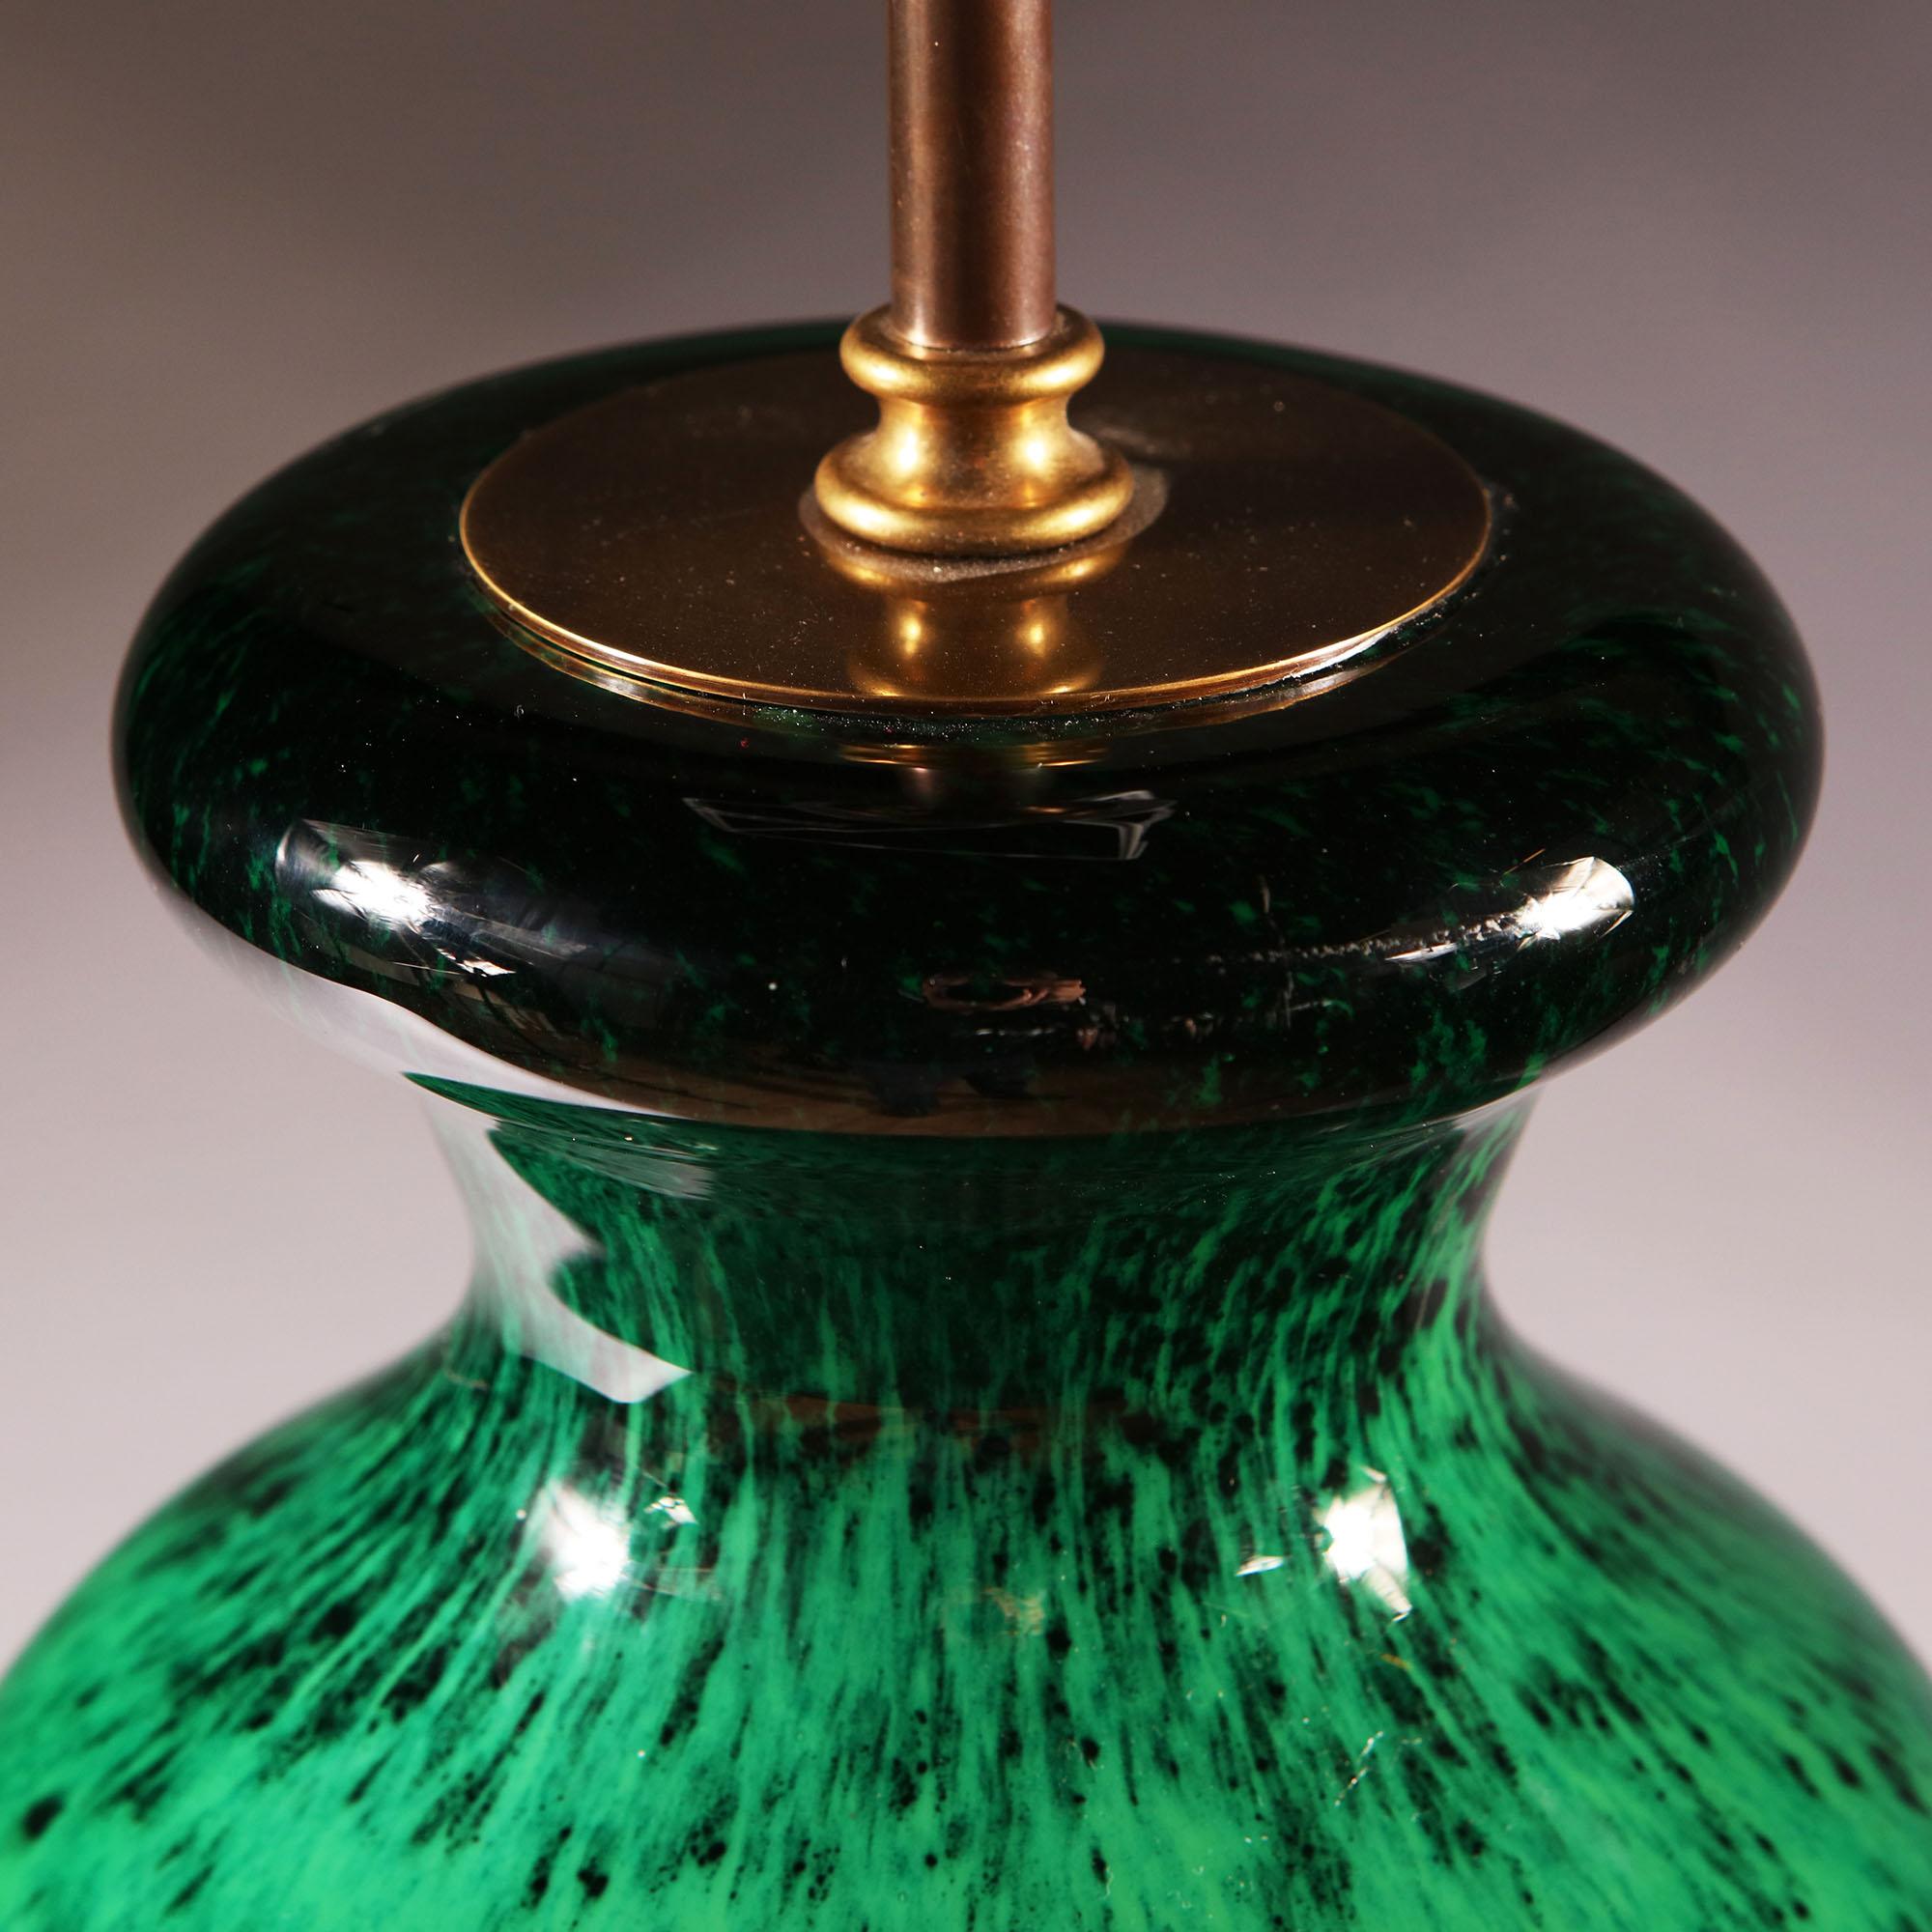 An early 20th century green art glass vase, with dappled green decoration, now converted as a lamp. Signed to the base A Masson.

Please note: Lampshade not included.

Currently wired for the UK.  